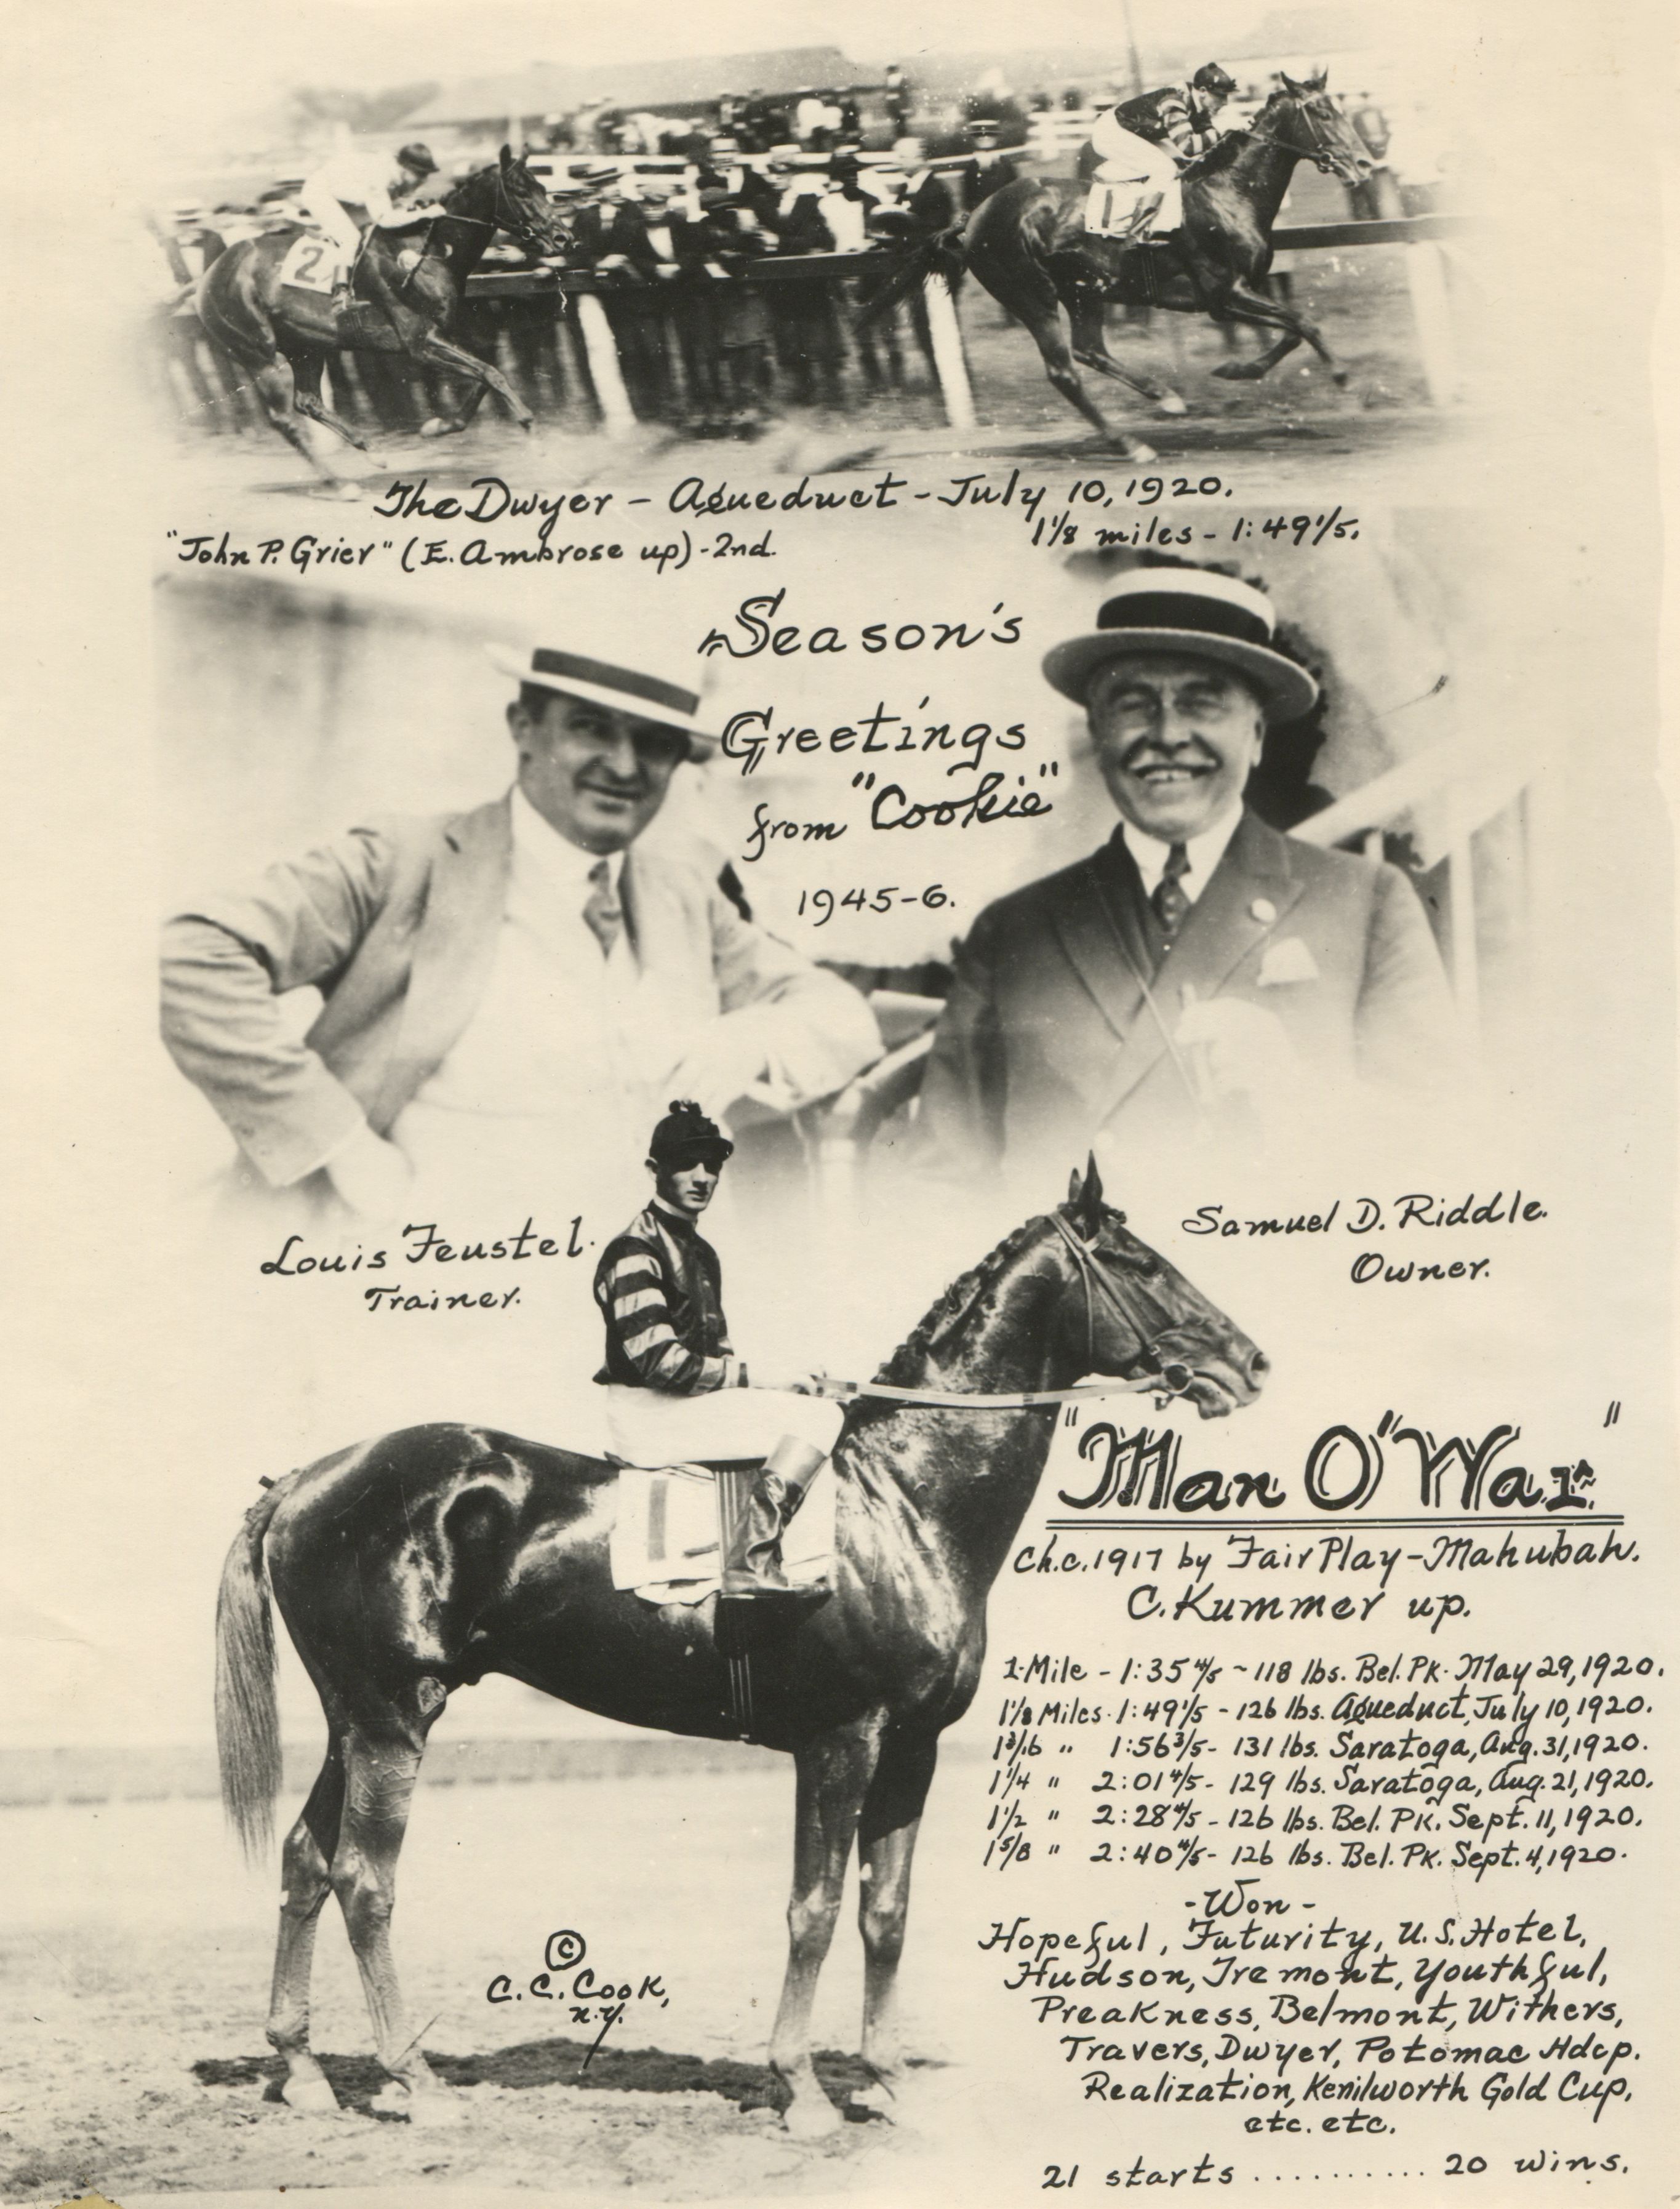 The 1920 Dwyer Stakes, won by Man o' War featured in the annual "Christmas Cookie" greeting card produced by photographer C. C. Cook (C. C. Cook/Museum Collection)